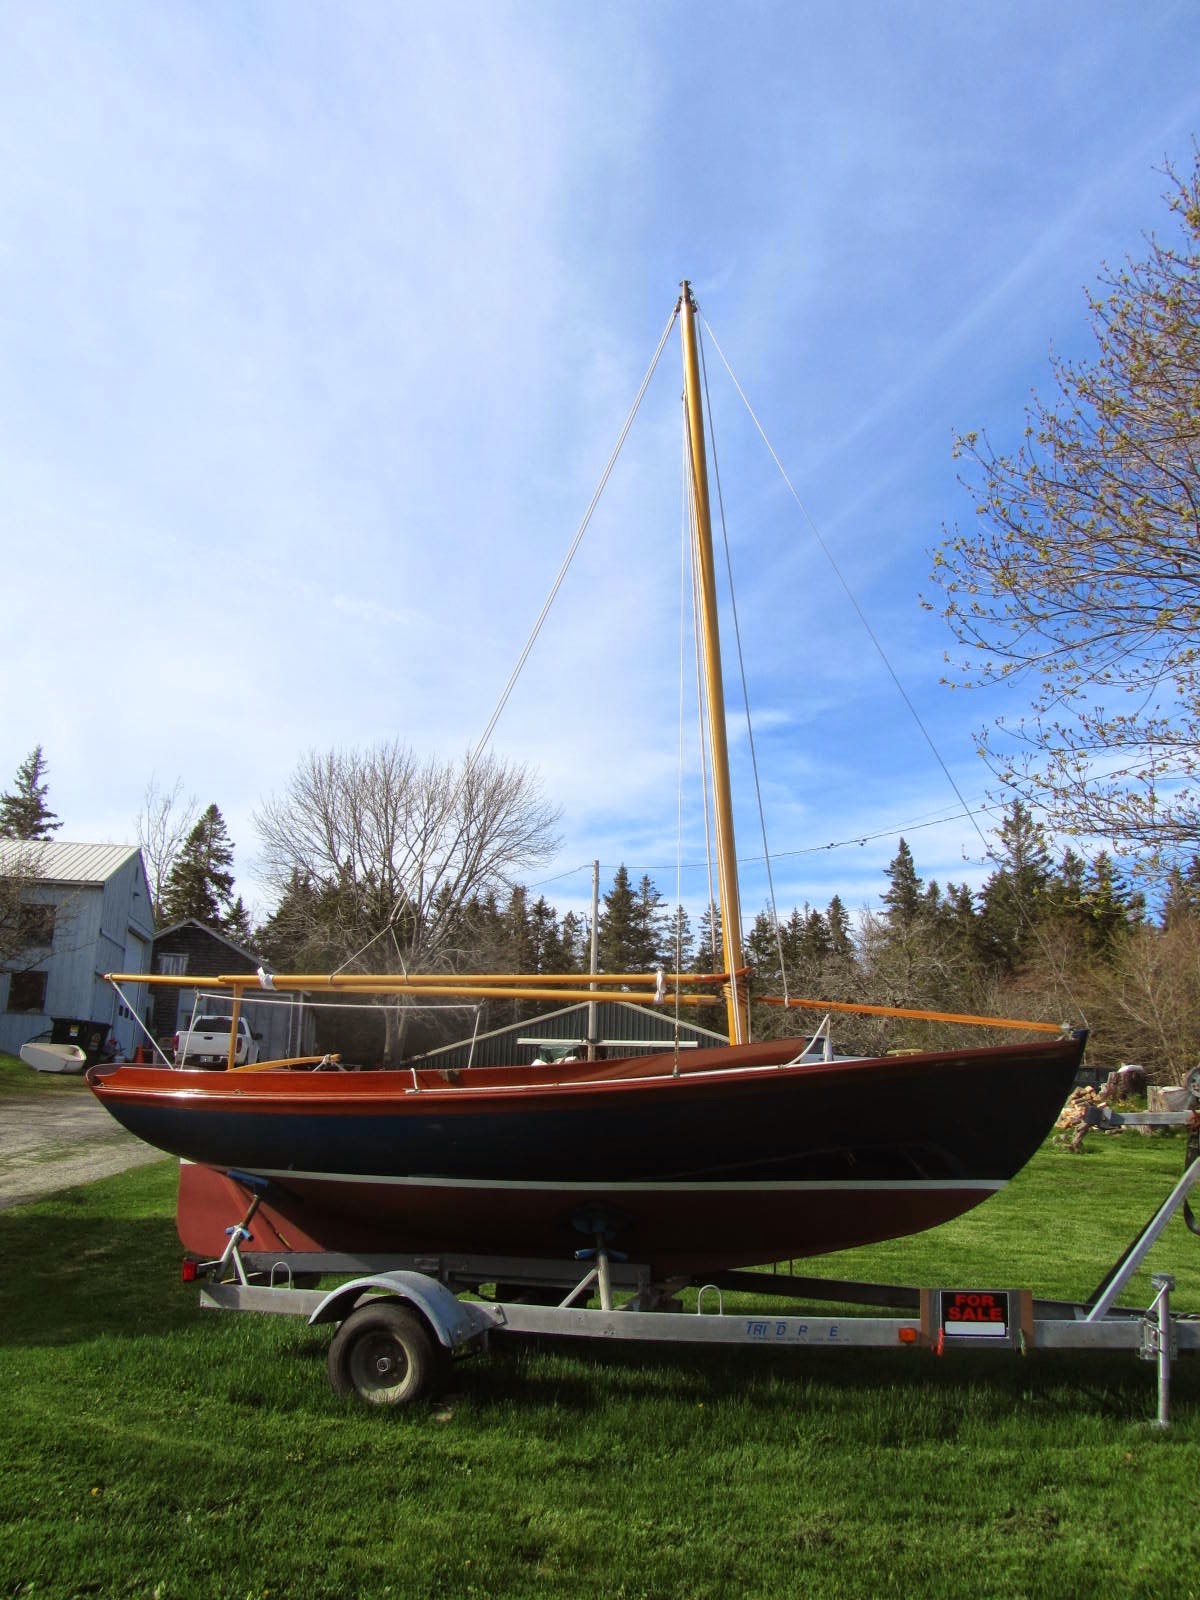 autoliterate: wooden boats for sale, eric dow's boatshop